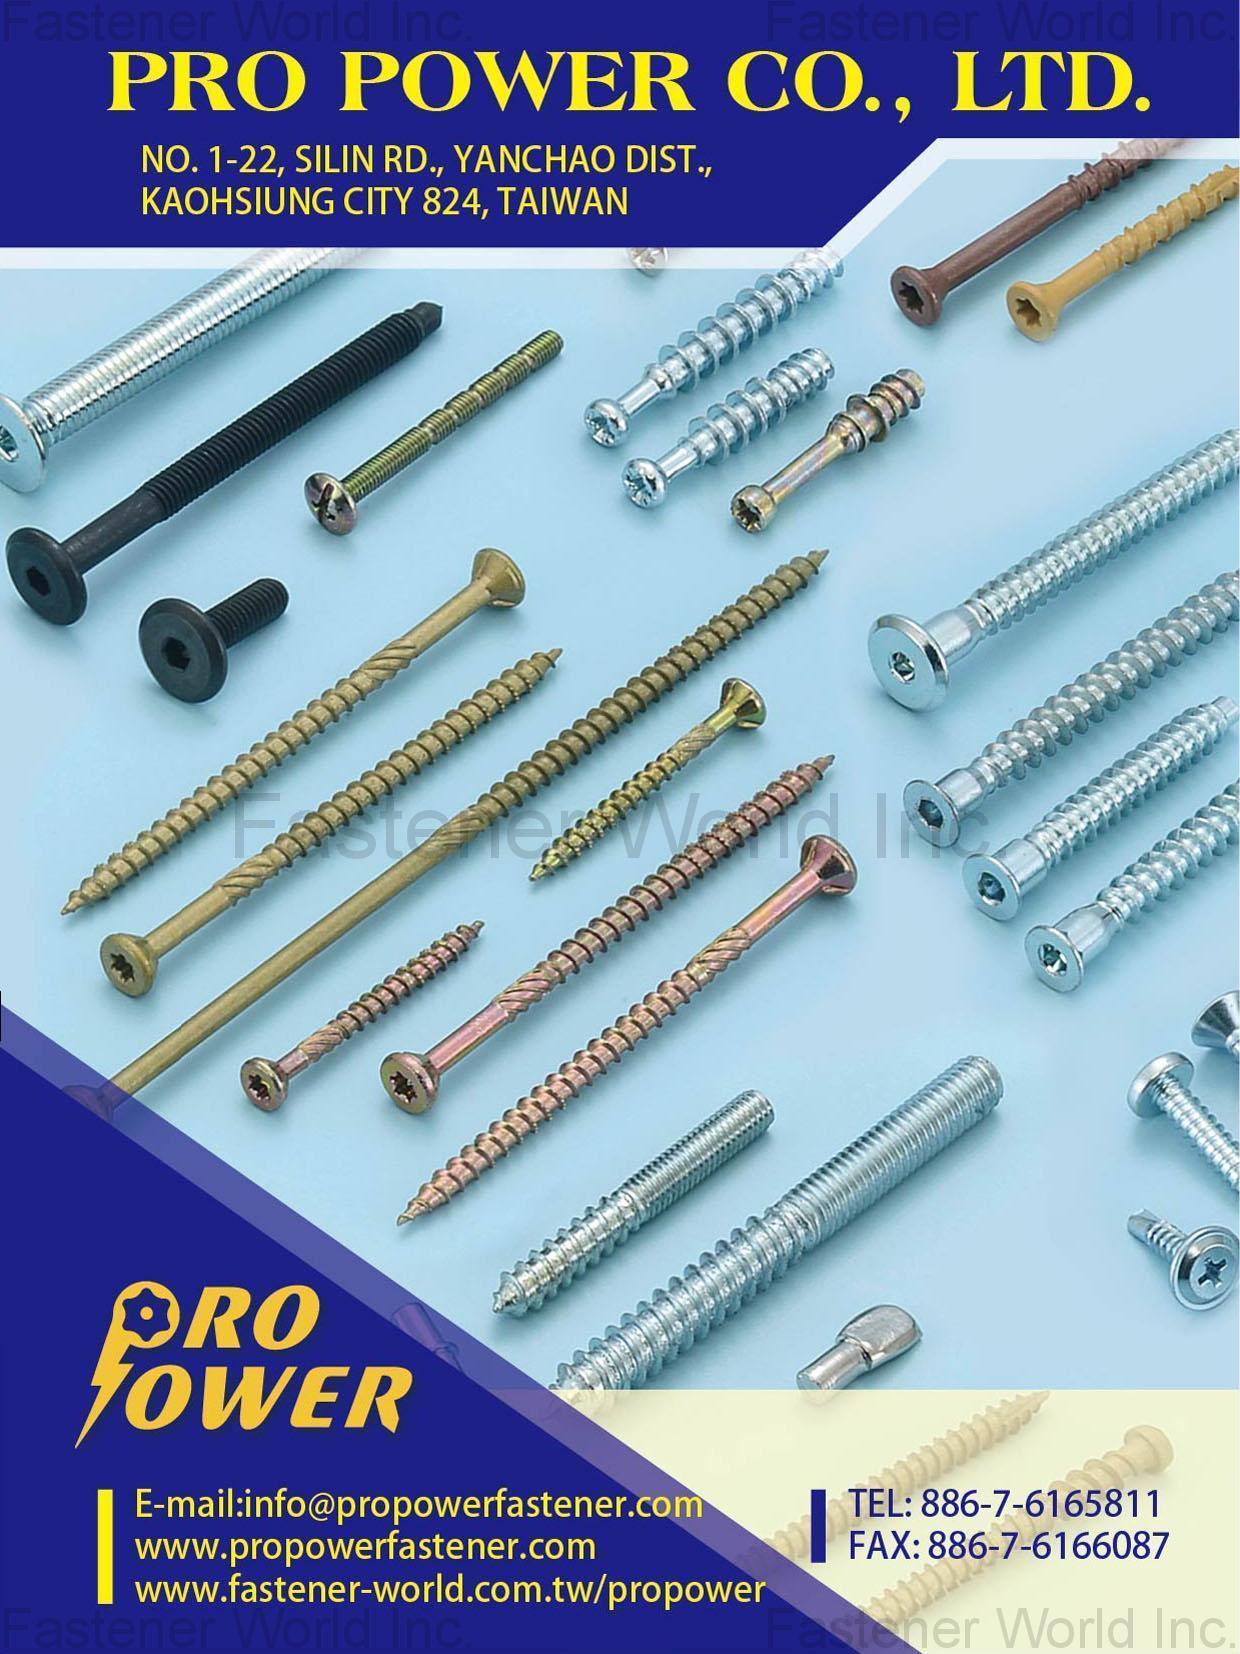 PRO POWER CO., LTD. , DECK SCREW,EURO SCREW, CHIPBOARD SCREW, PARTICLE BOARD SCREW, SELF DRILLING SCREW, SELF TAPPING SCREW, DRYWALL SCREW, CONFIRMAT SCREW, SLEEVE SCREW, MACHINE SCREW, JOINT CONNECTOR BOLT, BREAK-OFF MACHINE SCREW, SLEEVE NUT, SHELF SUPPORT(PIN) , All Kinds Of Building Materials And Accessories